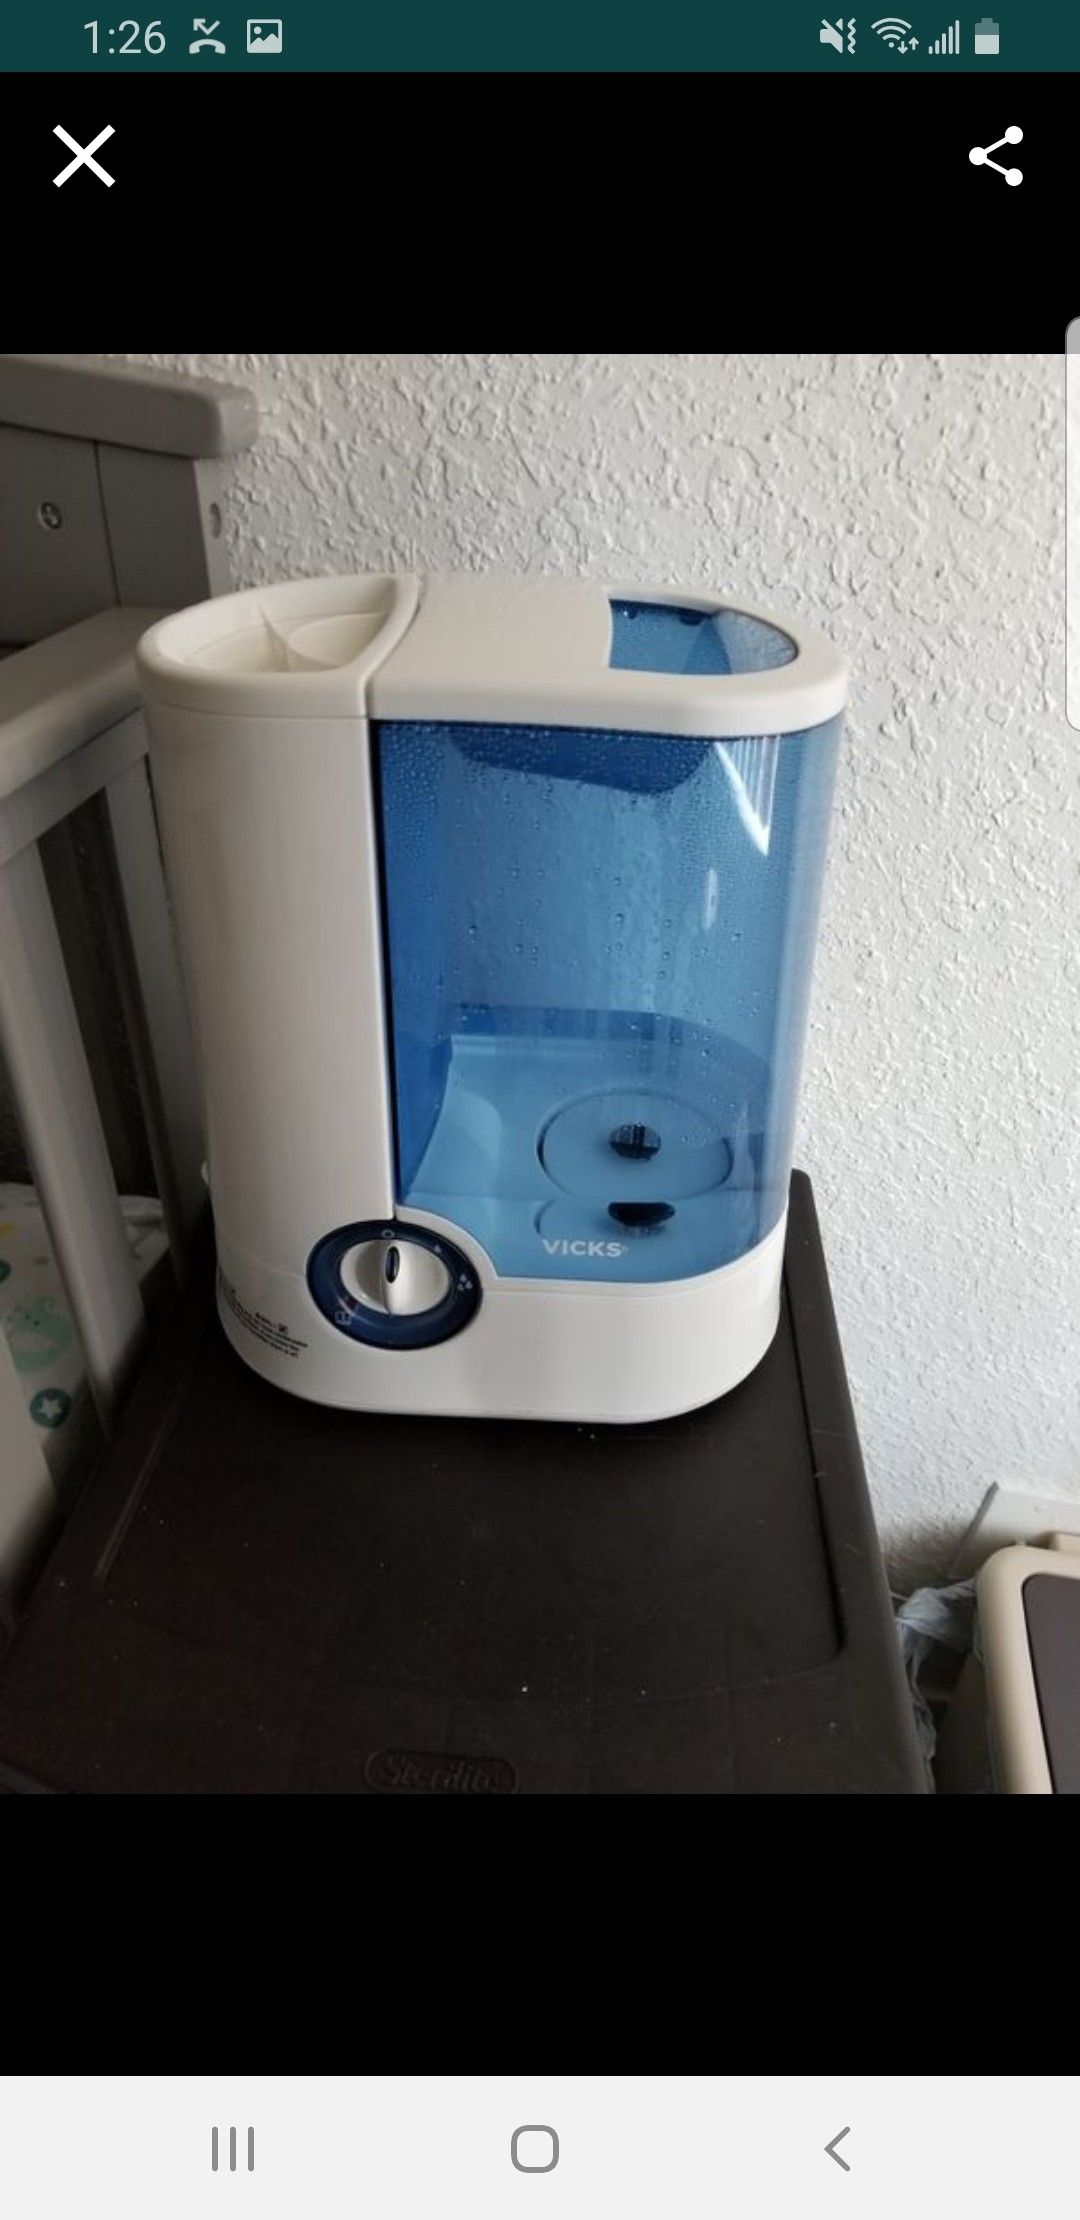 Humidifier $5 works great